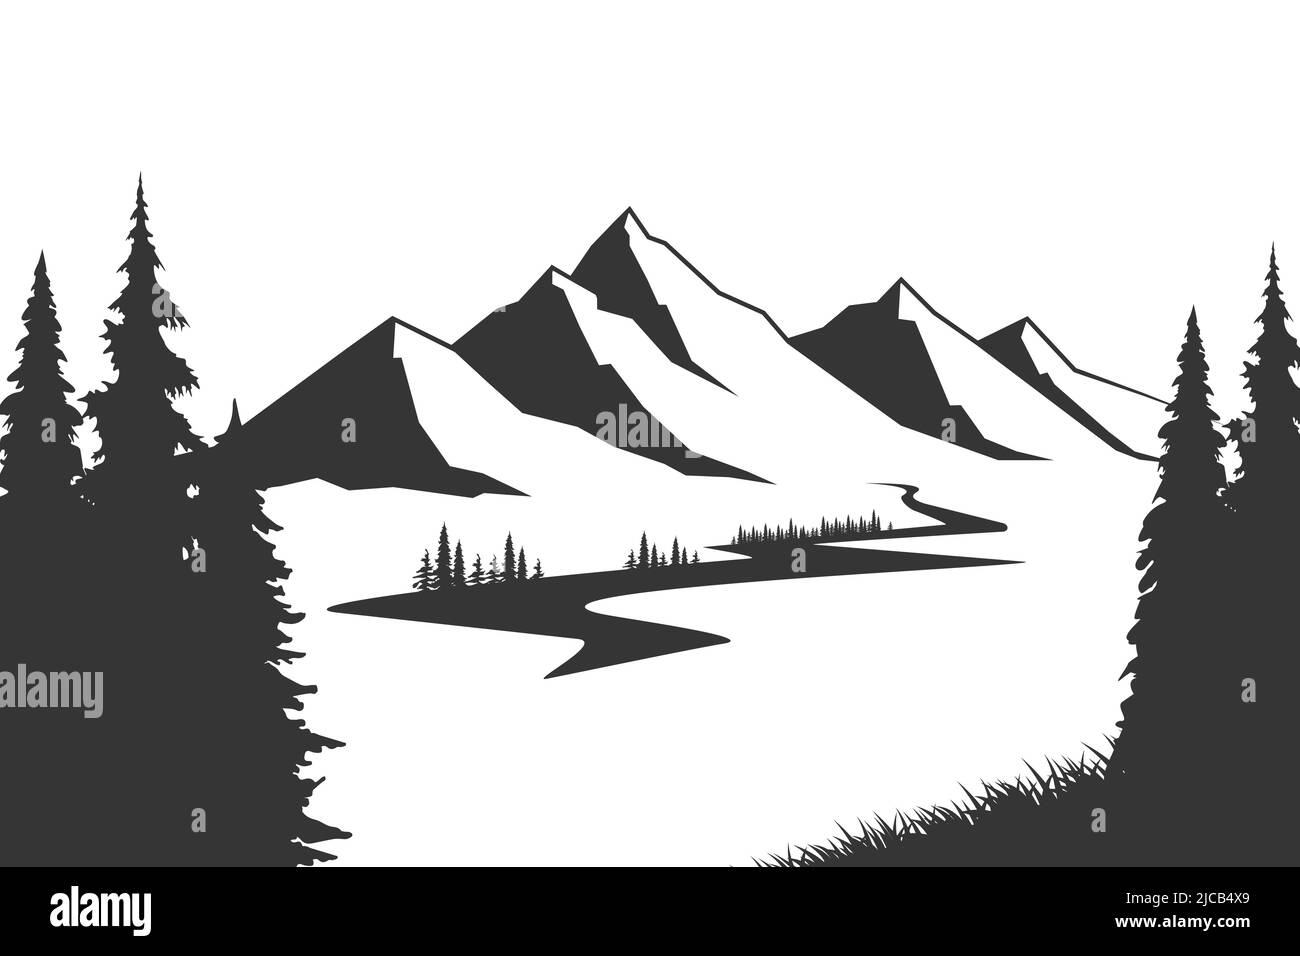 https://c8.alamy.com/comp/2JCB4X9/mountain-with-pine-trees-and-landscape-black-on-white-background-vector-illustration-mountain-with-pine-trees-on-white-background-mountain-verctor-2JCB4X9.jpg